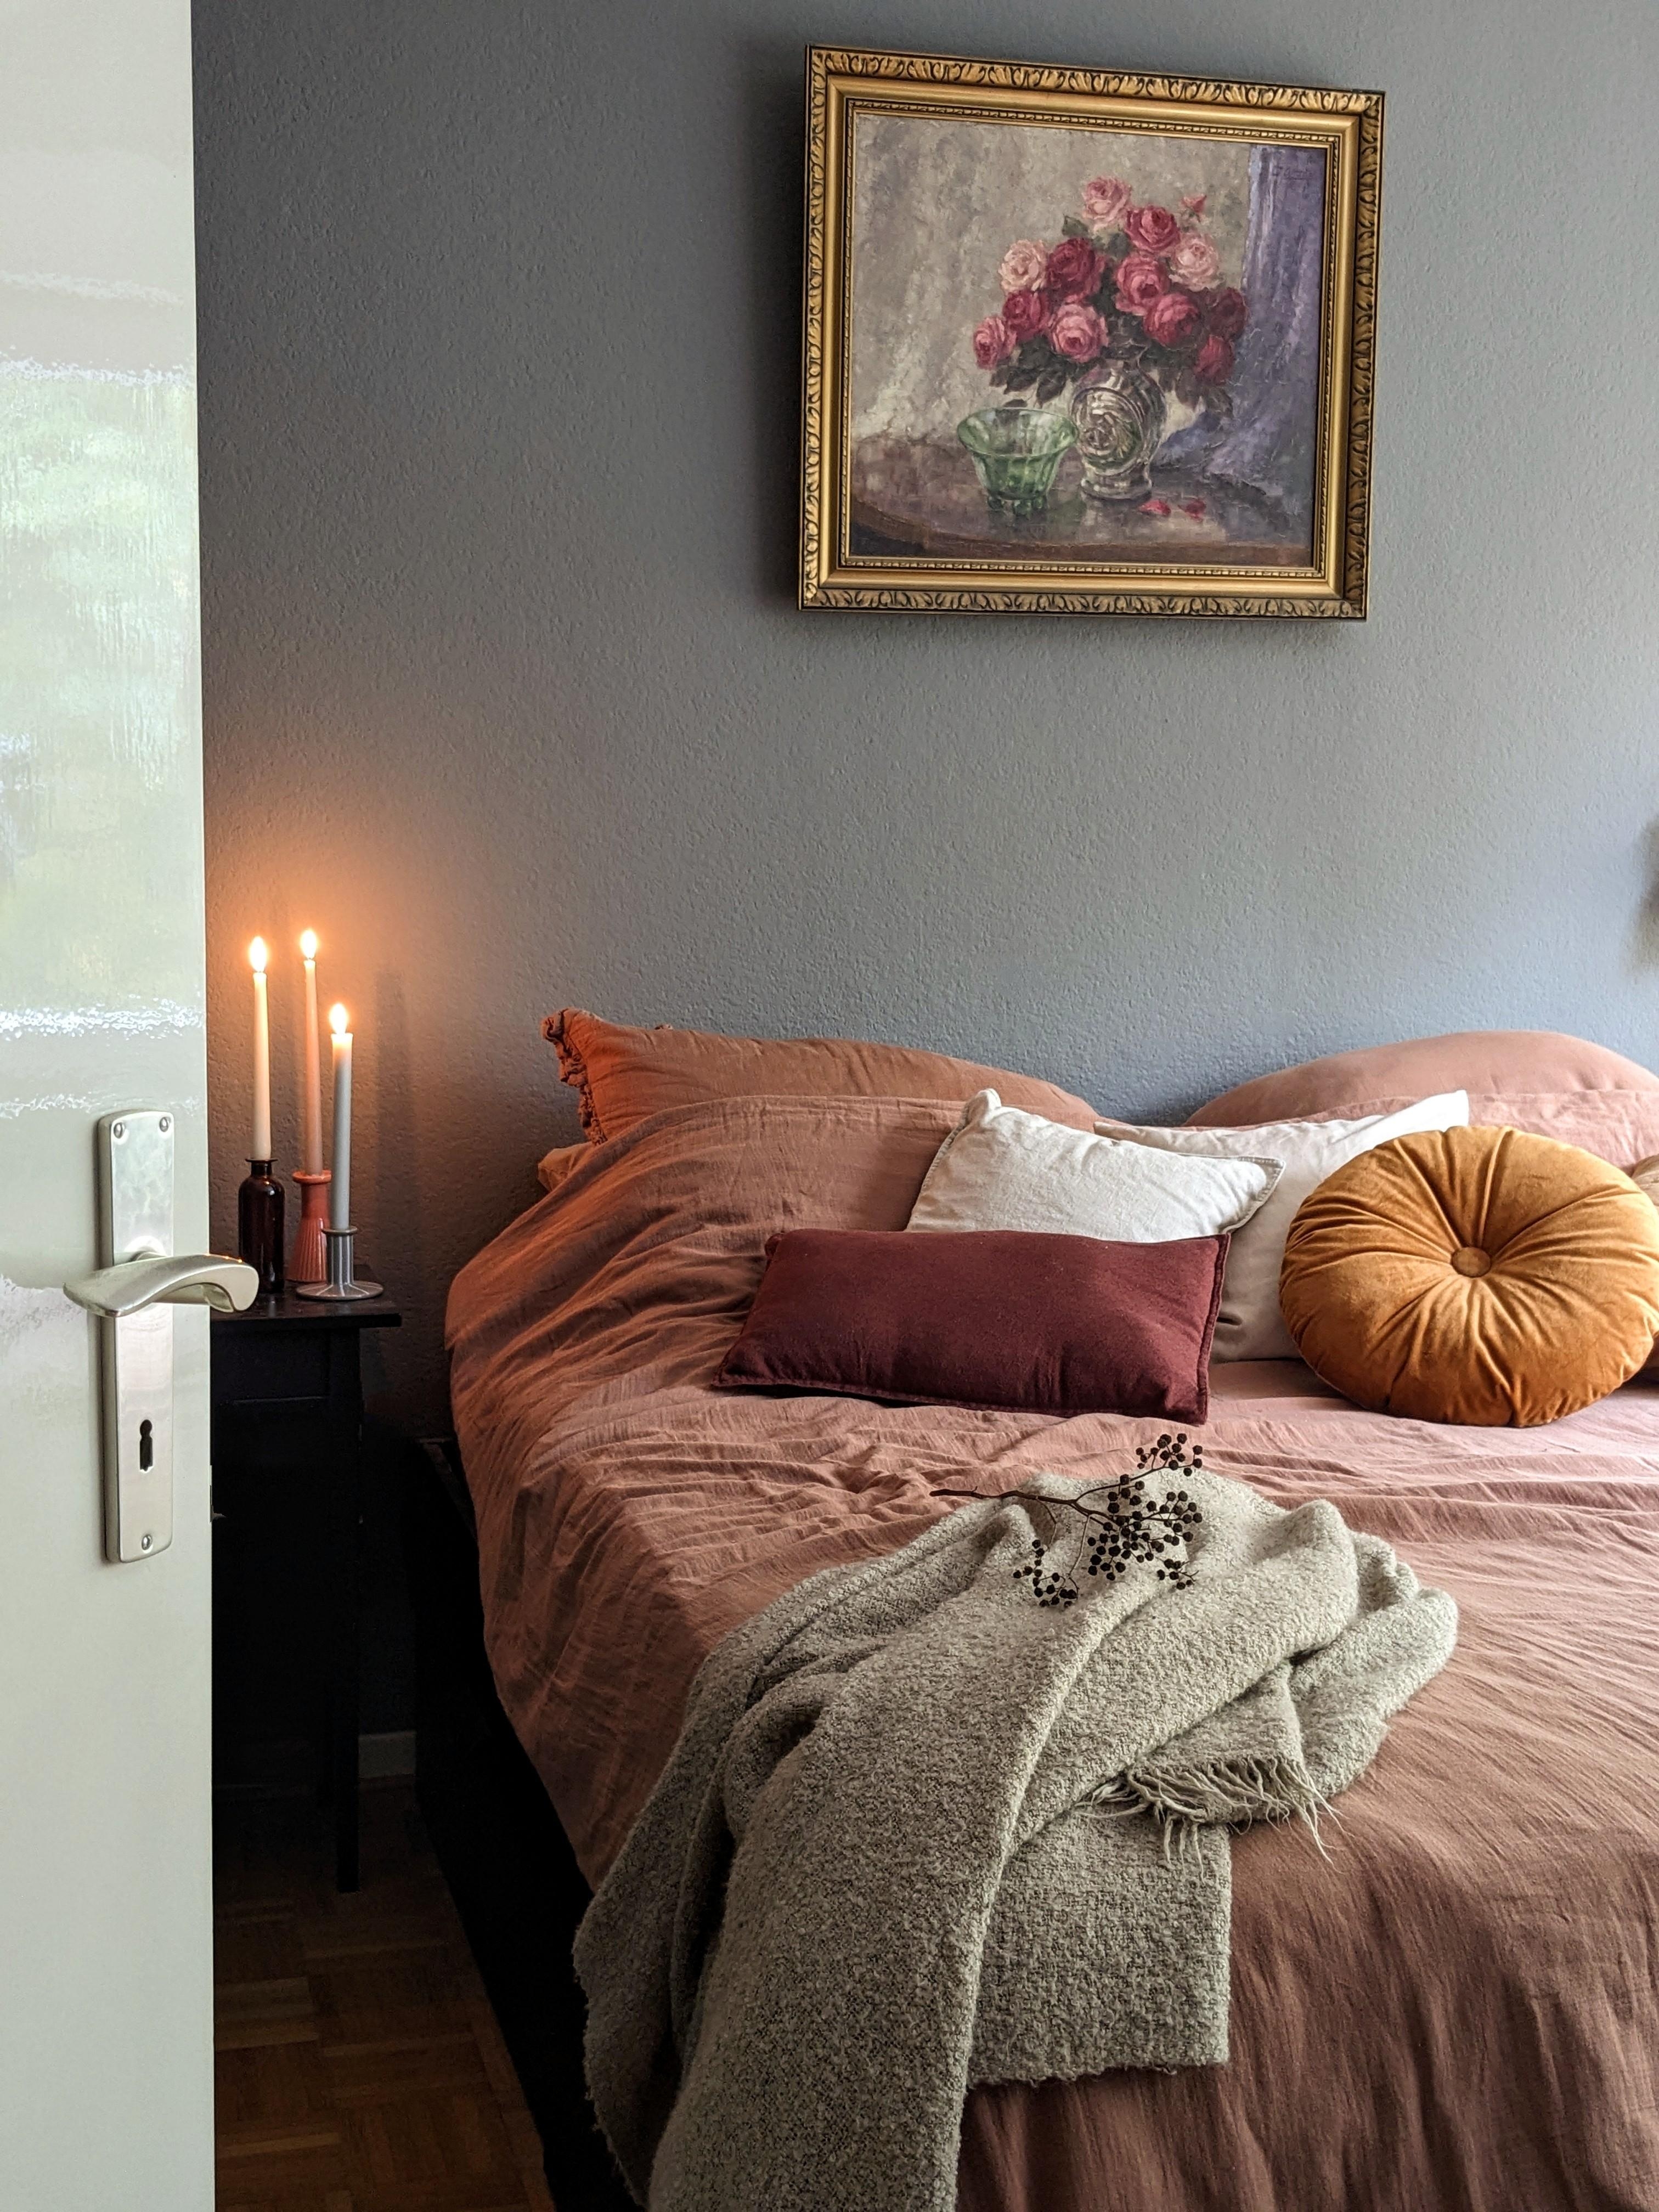 Bedroomstory.
#couchliebt #schlafzimmer #herbst #cozyliving #autumn #moody